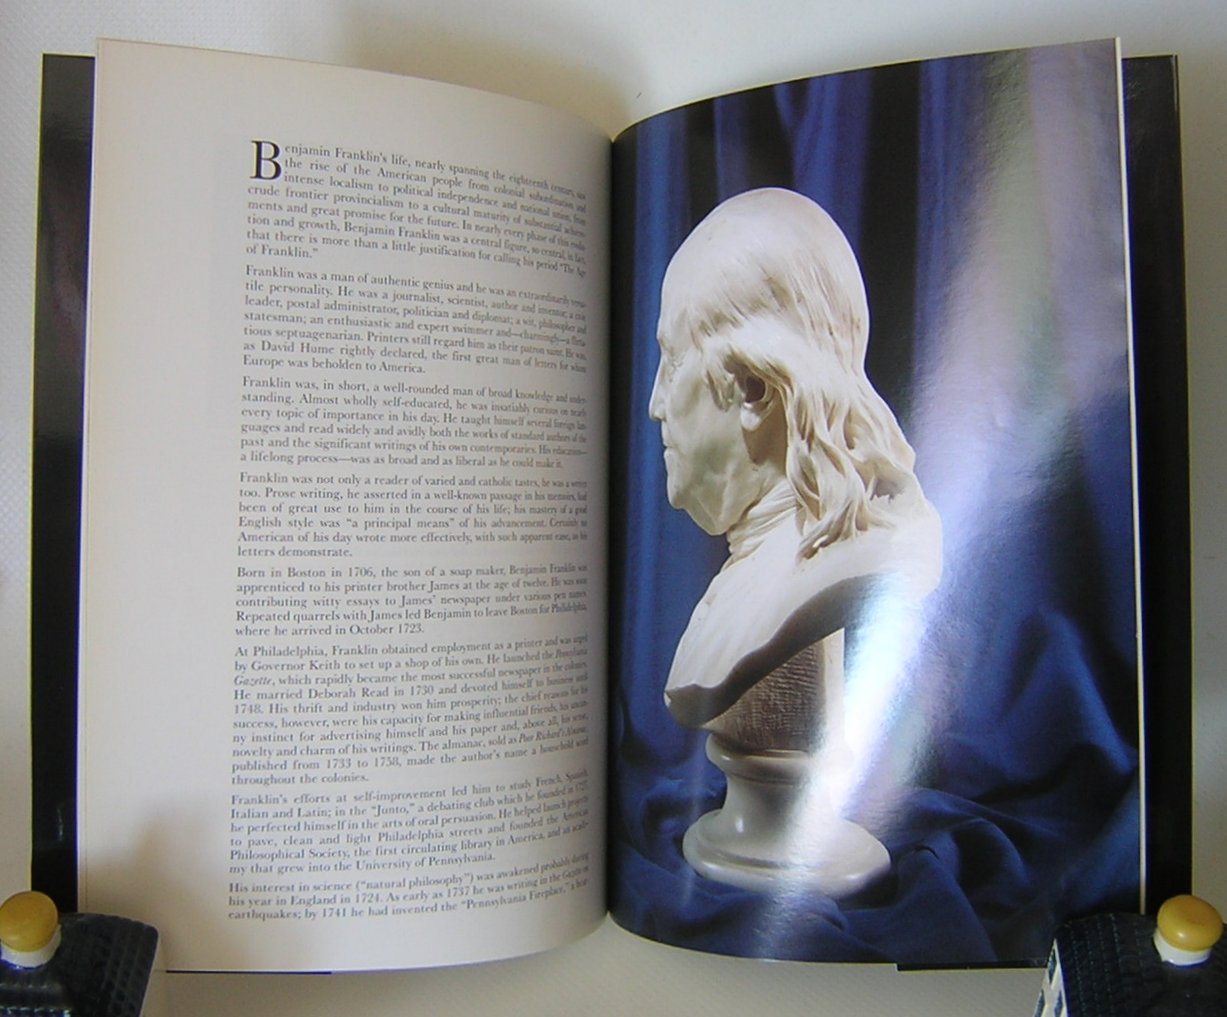 Sotheby's Auction Catalog 1996 Houdon Marble Benjamin Franklin Giveaway Give Away -b.jpg